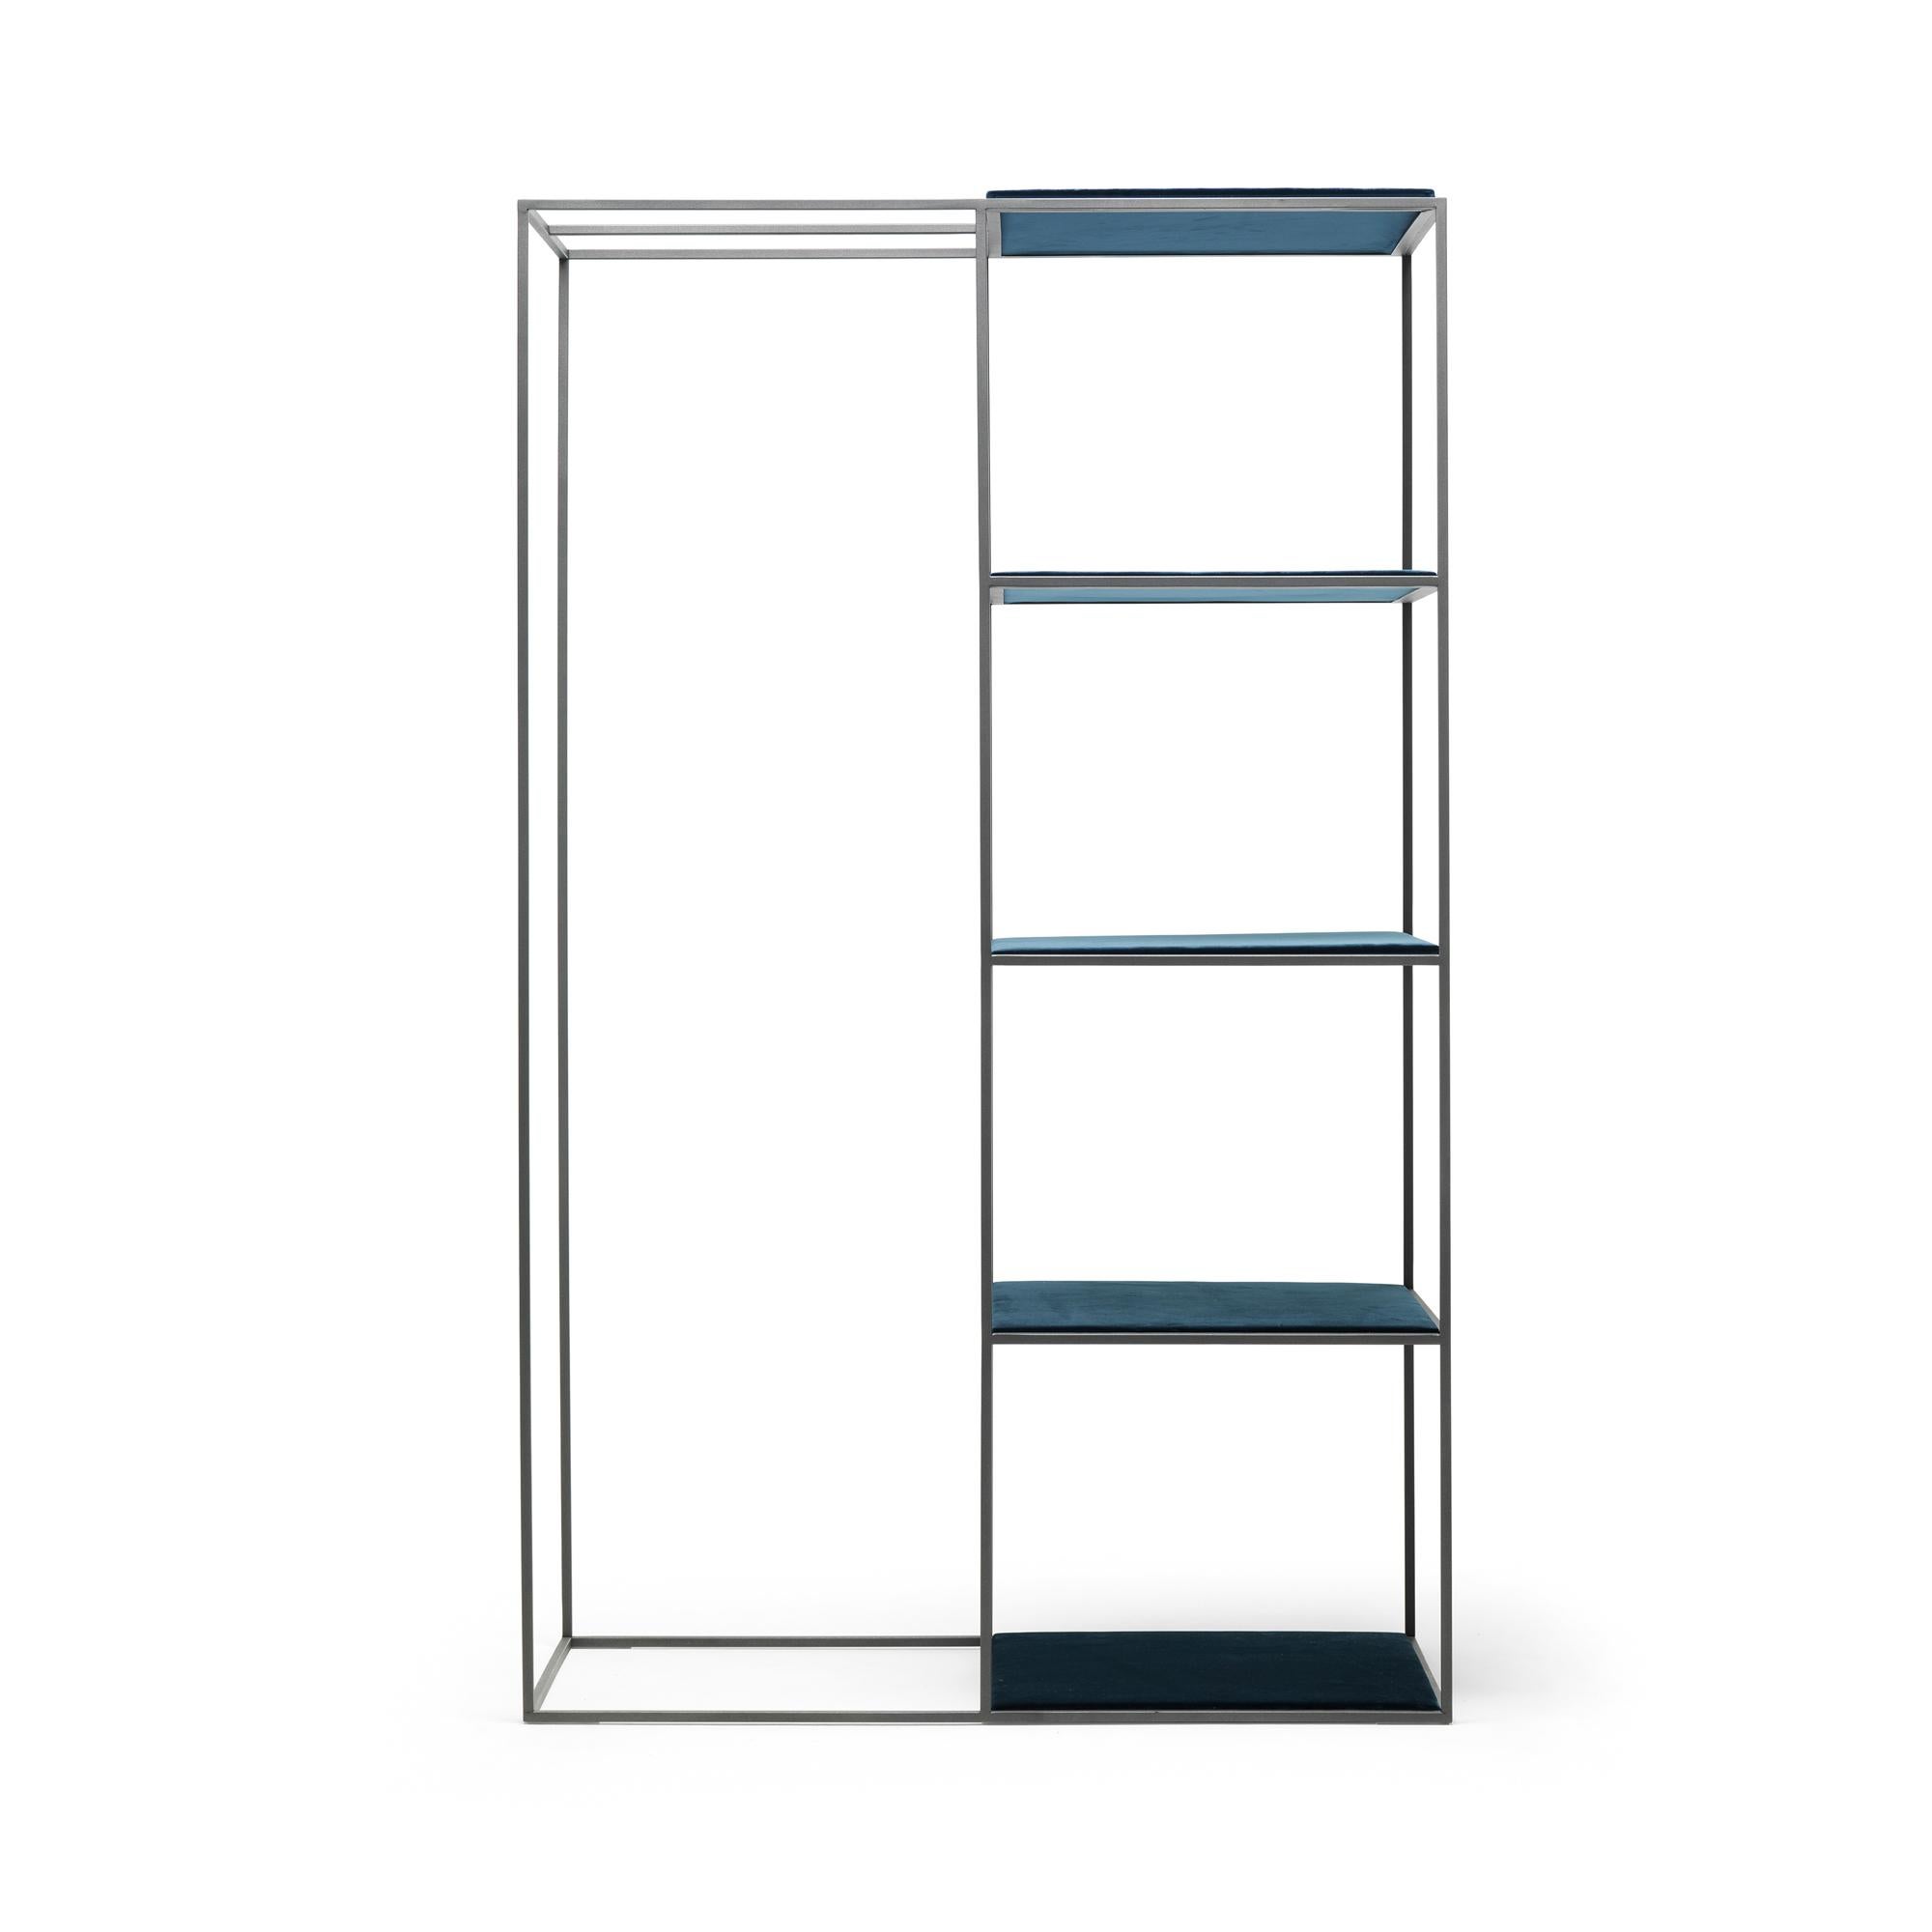 21st Century Modern Painted Steel Wardrobe With Shelves In Cotton Velvet In New Condition For Sale In Milan, IT